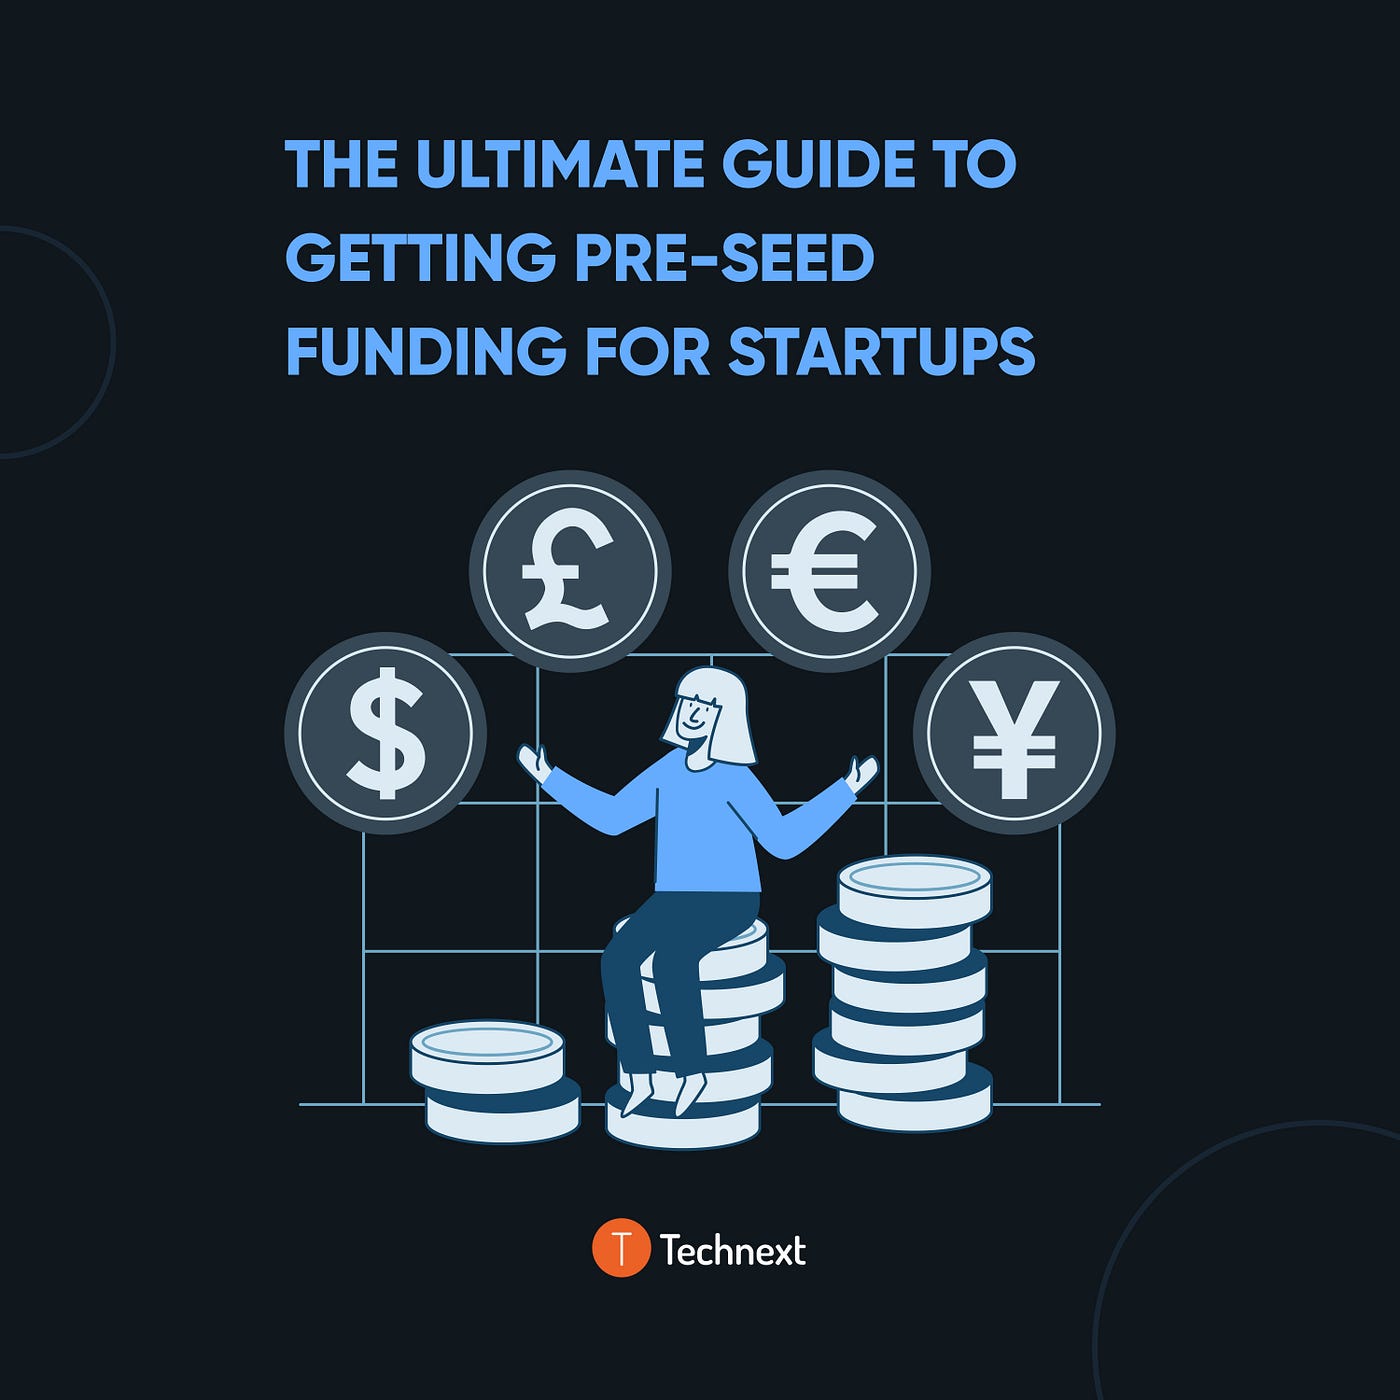 What should founders know about pre-seed funding before taking the